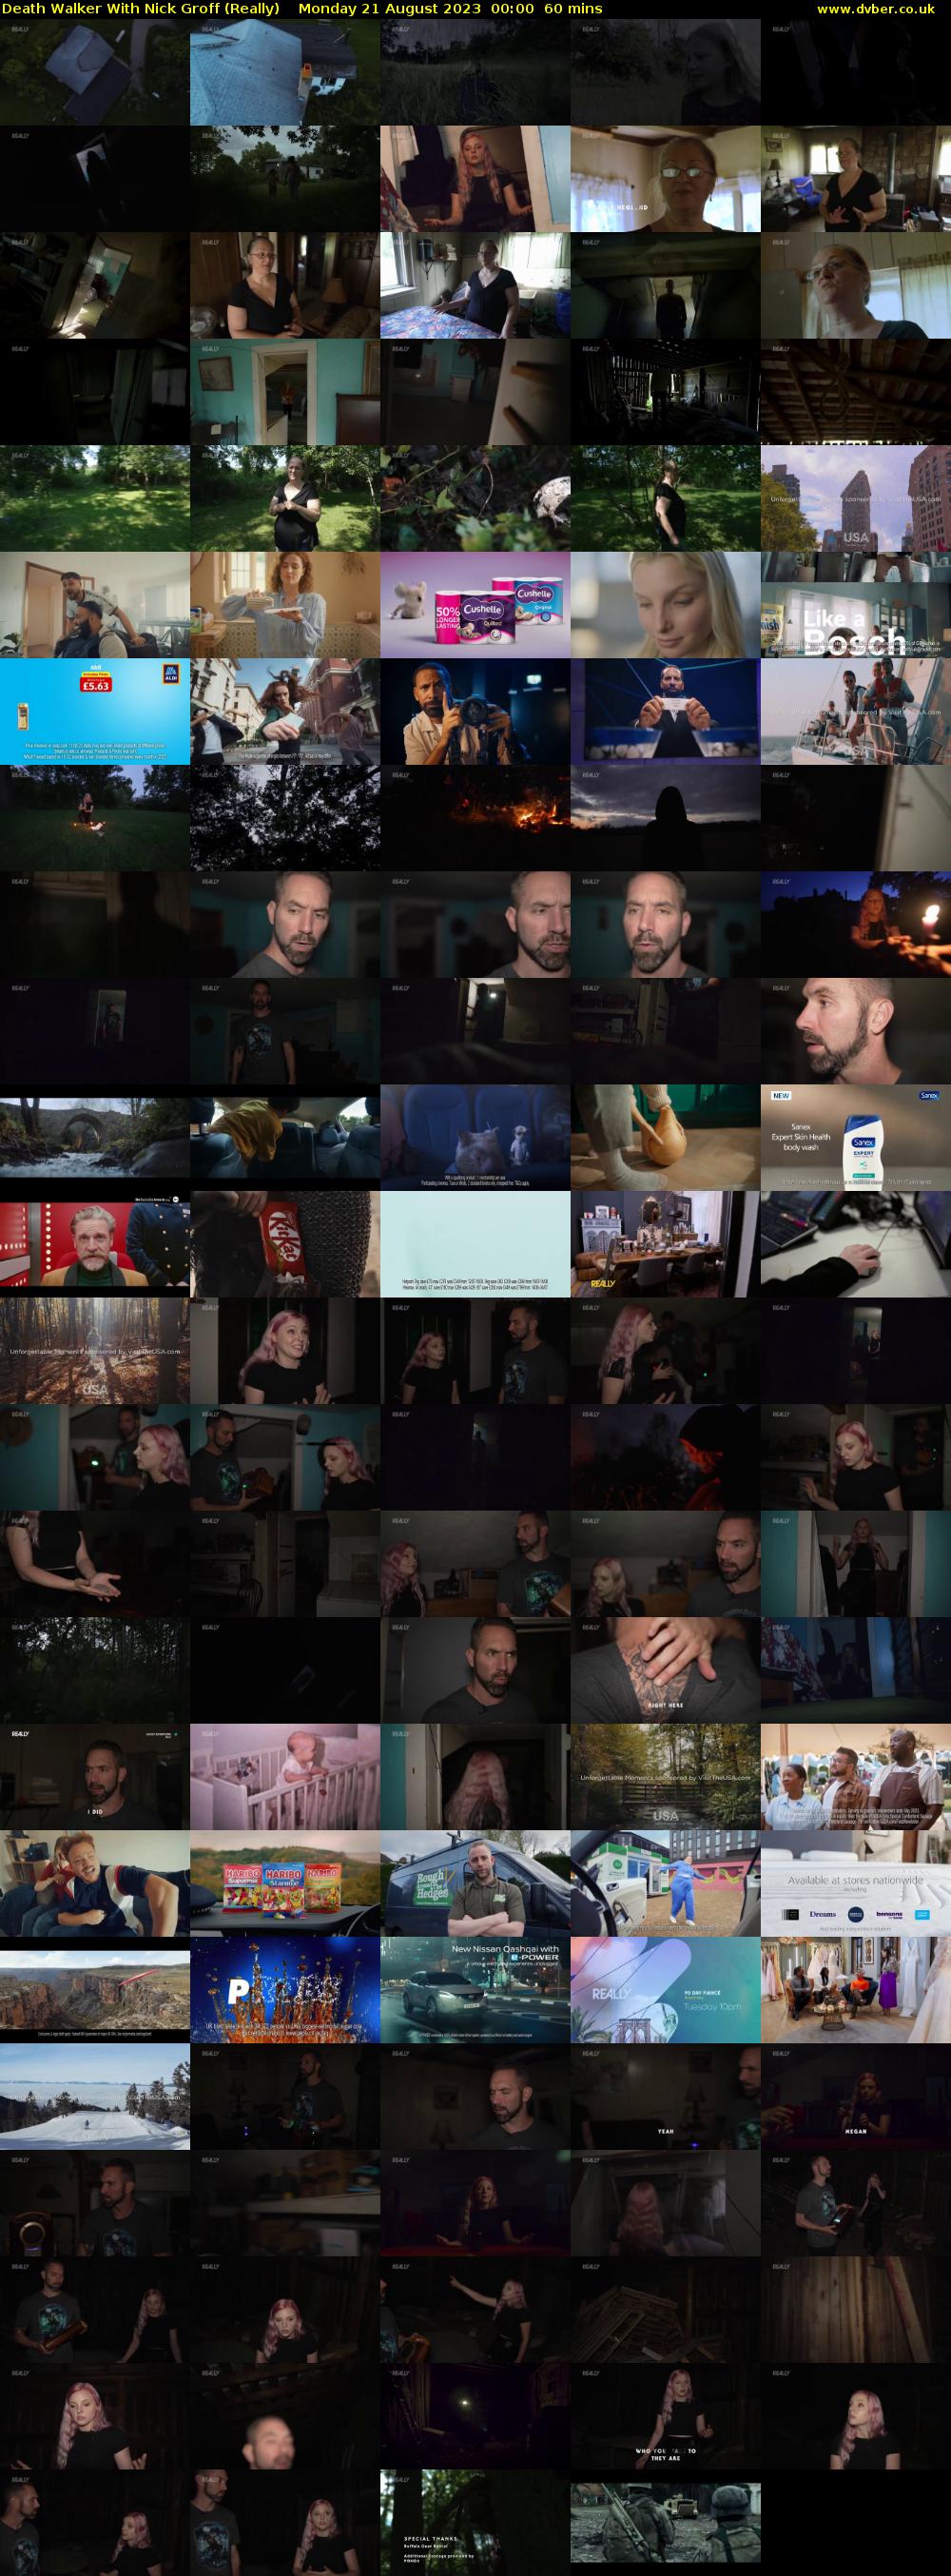 Death Walker With Nick Groff (Really) Monday 21 August 2023 00:00 - 01:00